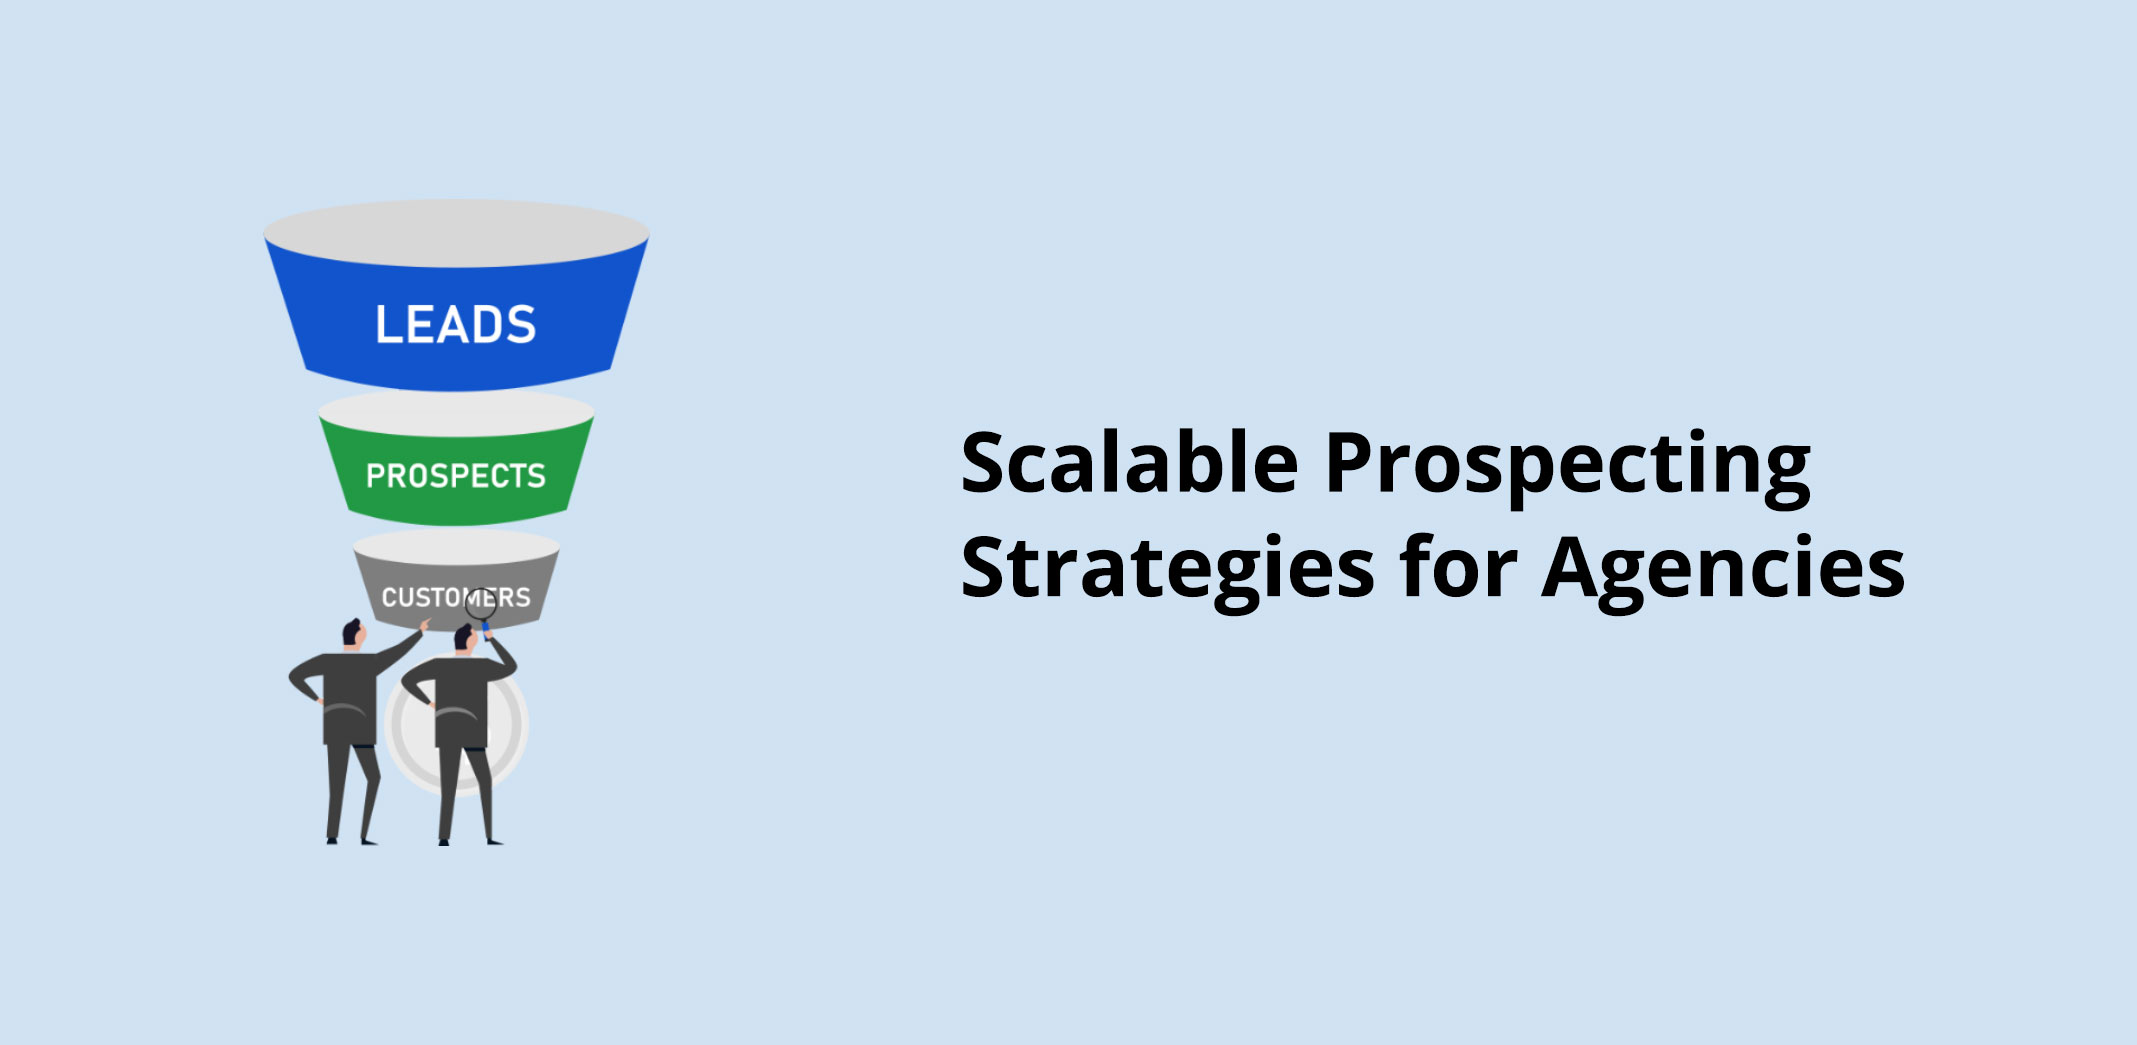 Scalable Prospecting Strategies for Agencies